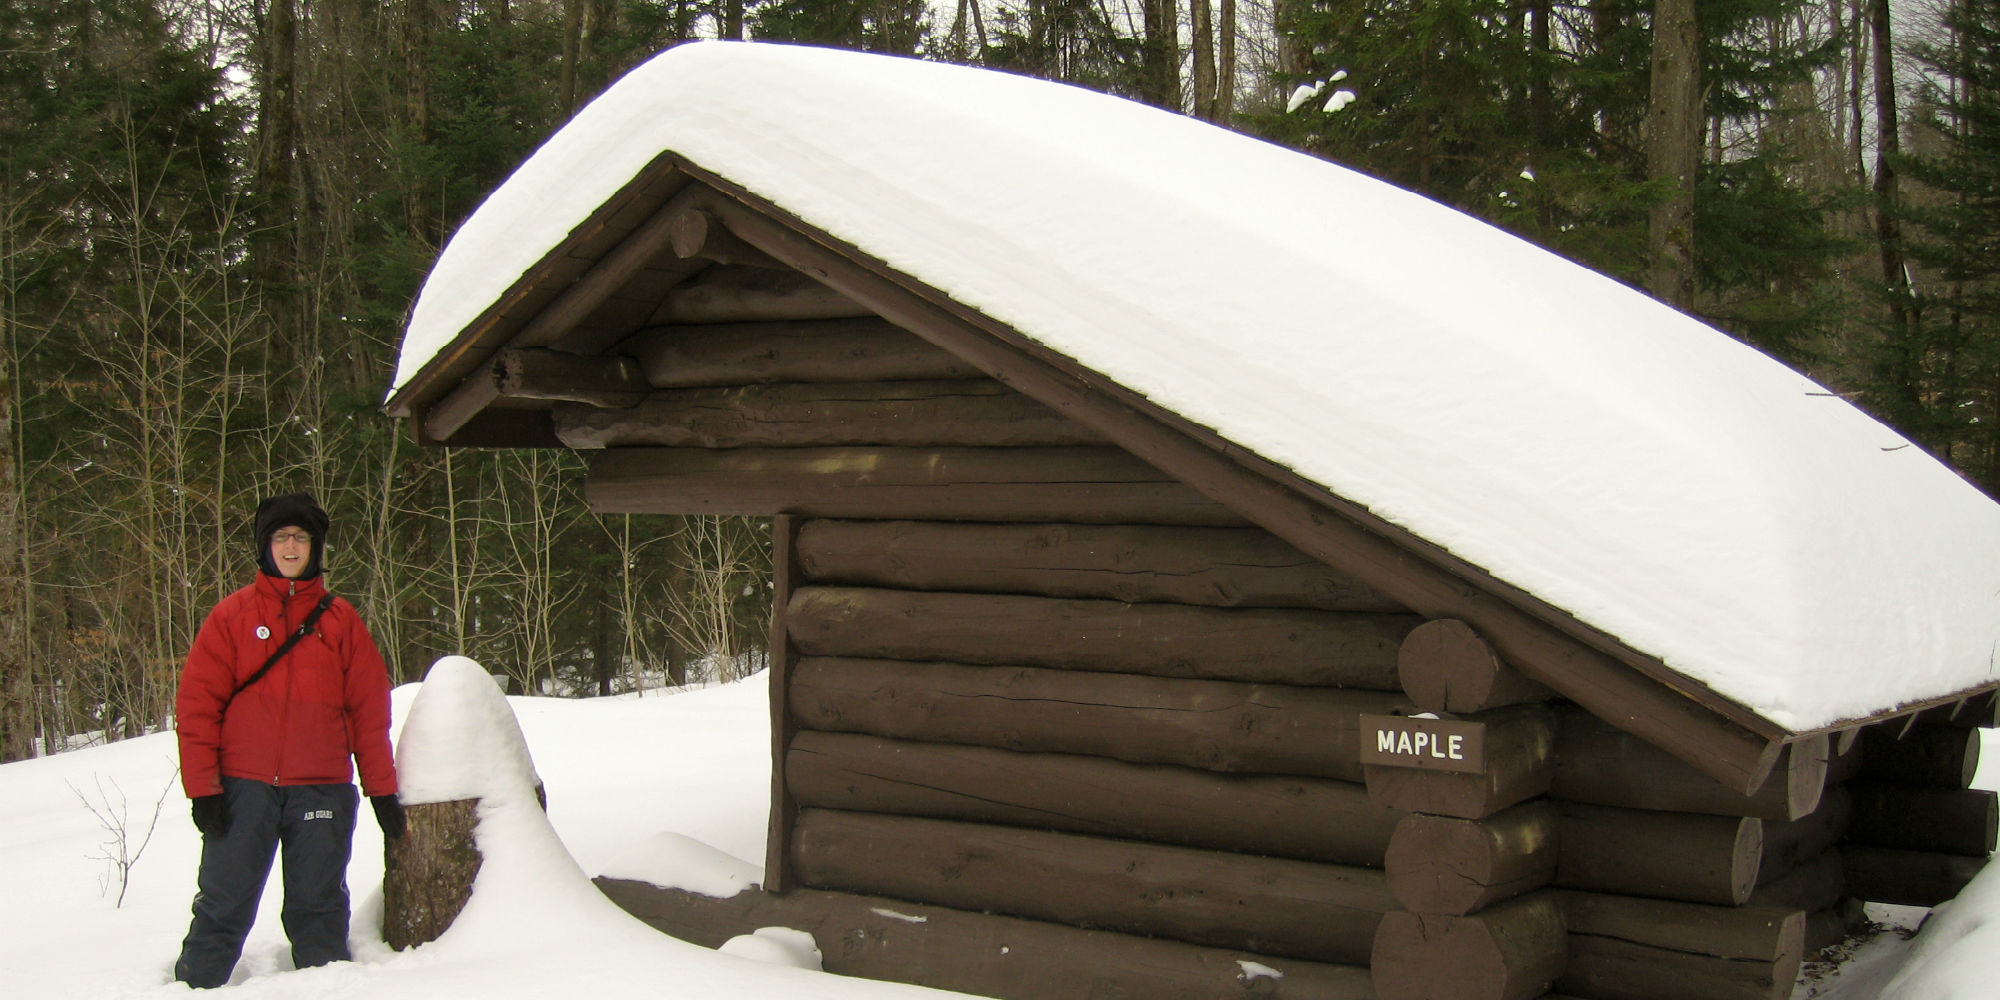 A winter camper stands next to a snowy leanto